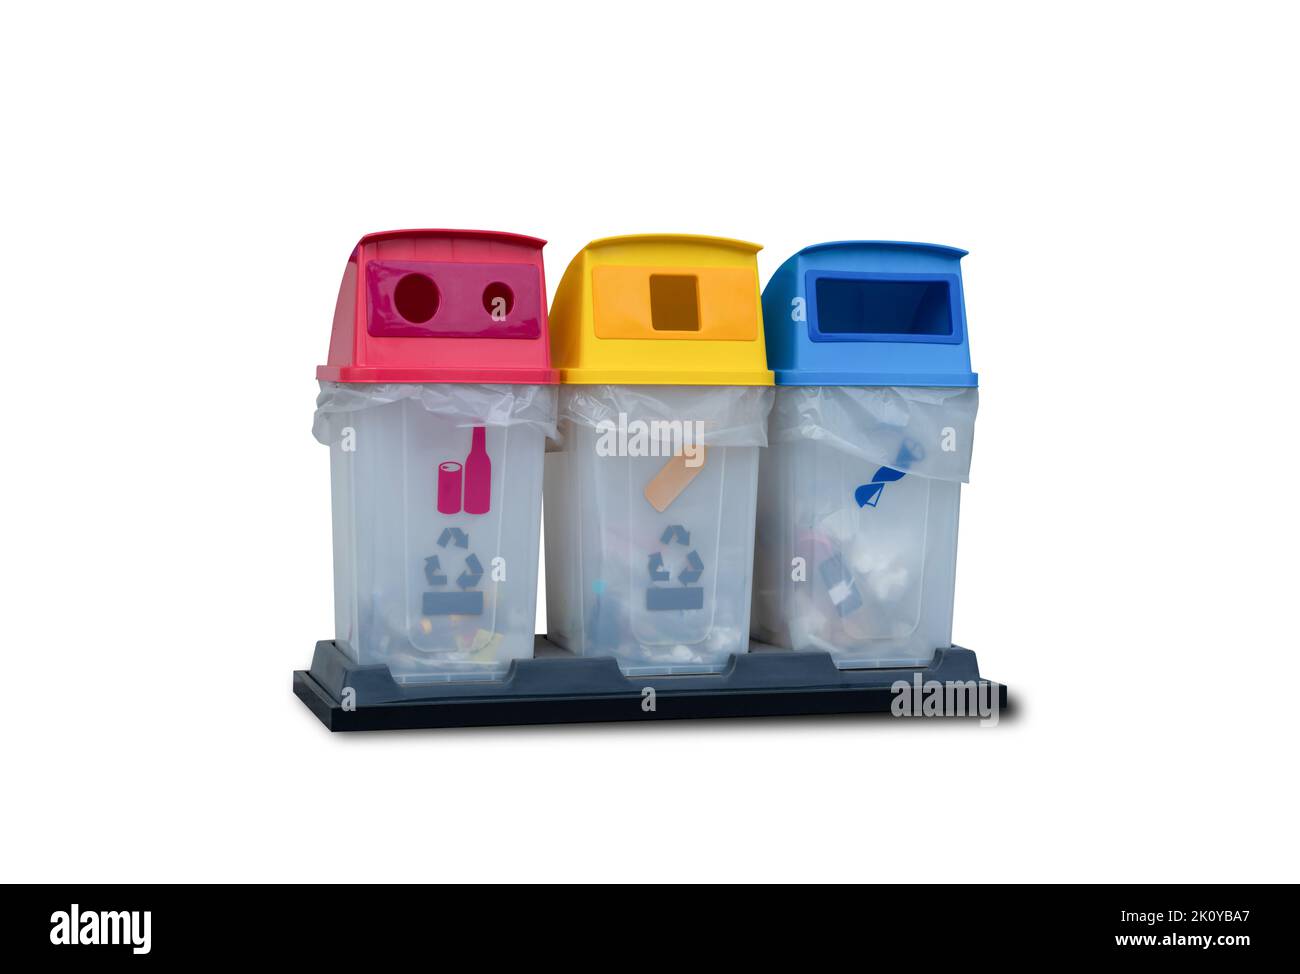 Three colorful recycle bin isolated on white background included clipping path. Bins with recycle symbol Stock Photo